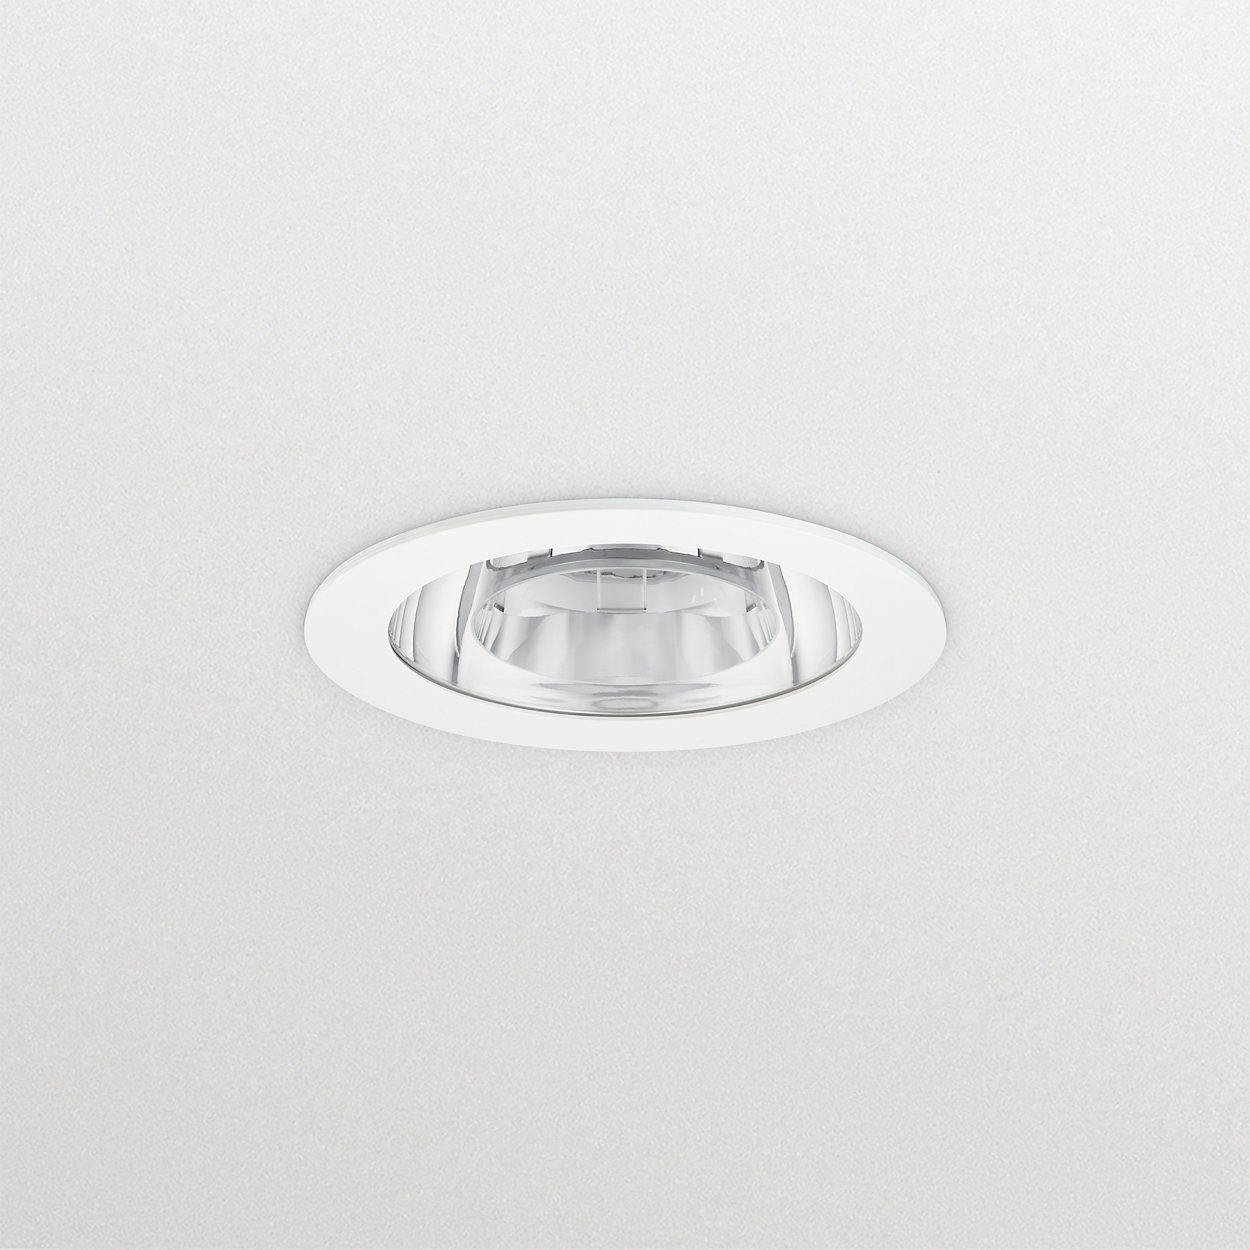 The high-efficiency, sustainable LED solution with GreenSpace downlight